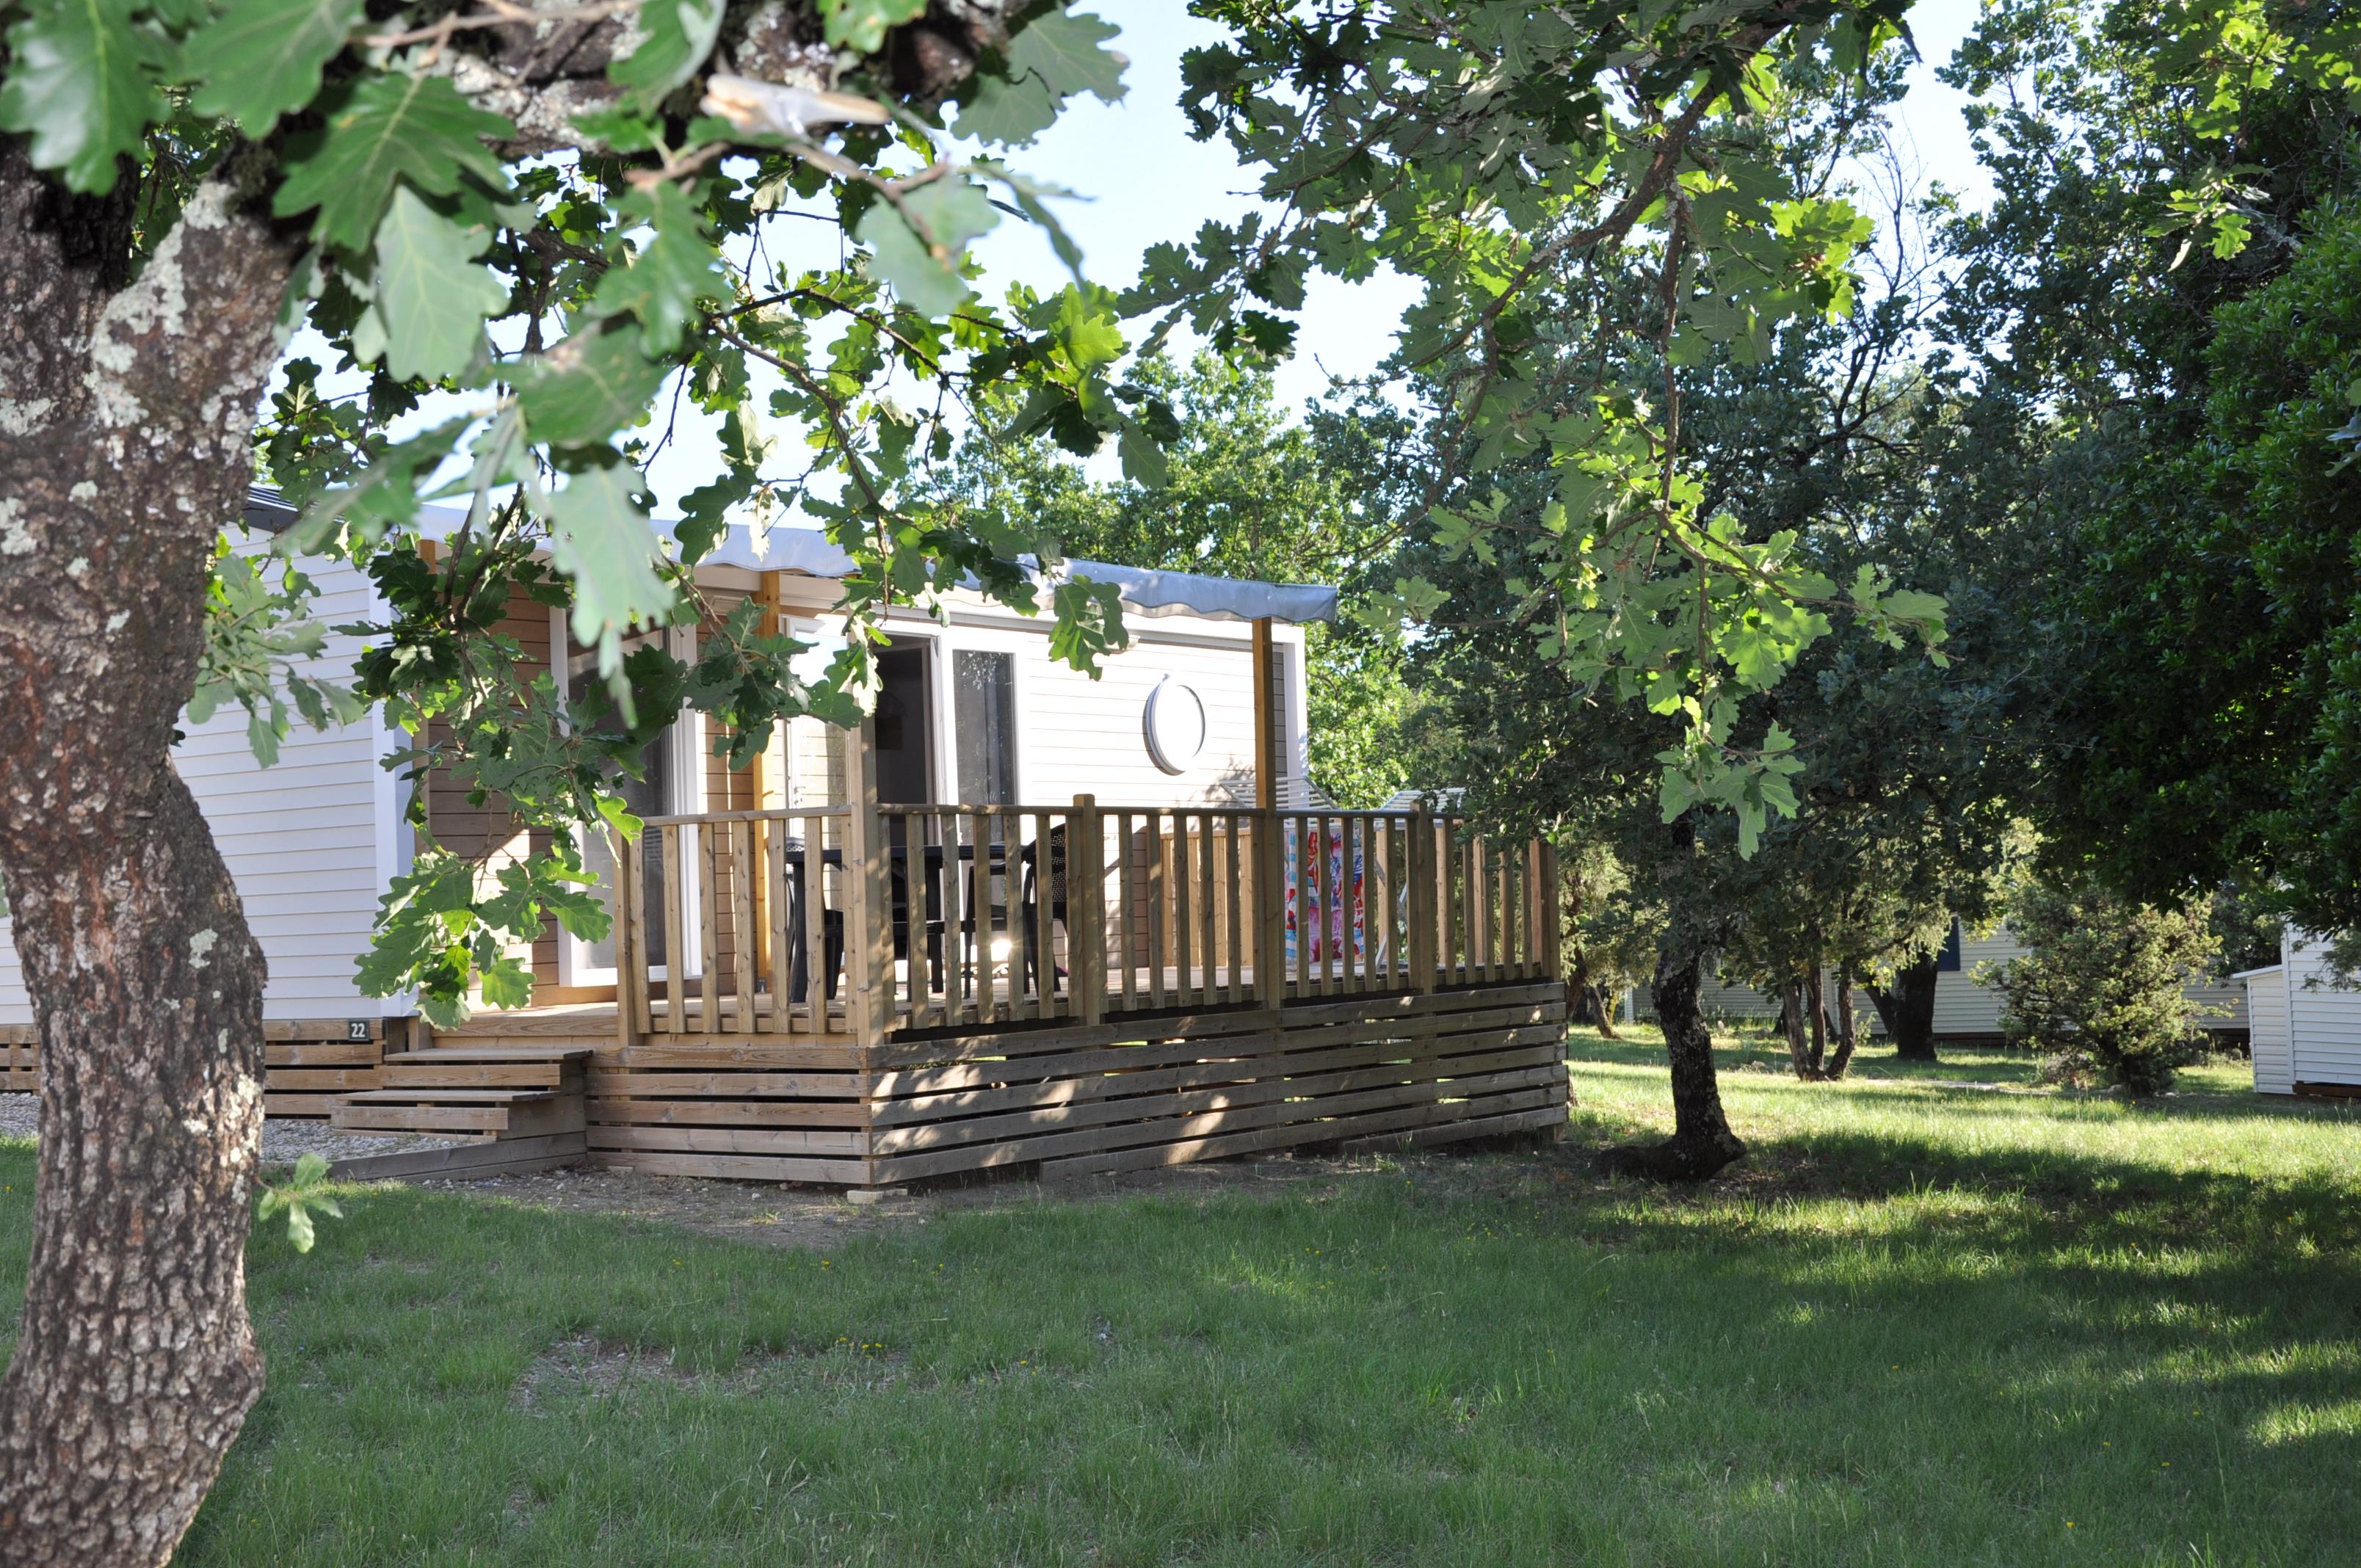 Huuraccommodatie - Cottage Premium Airco - 2 Bedrooms (Arrival On Saturday In High Season) - Camping L'Ombrage